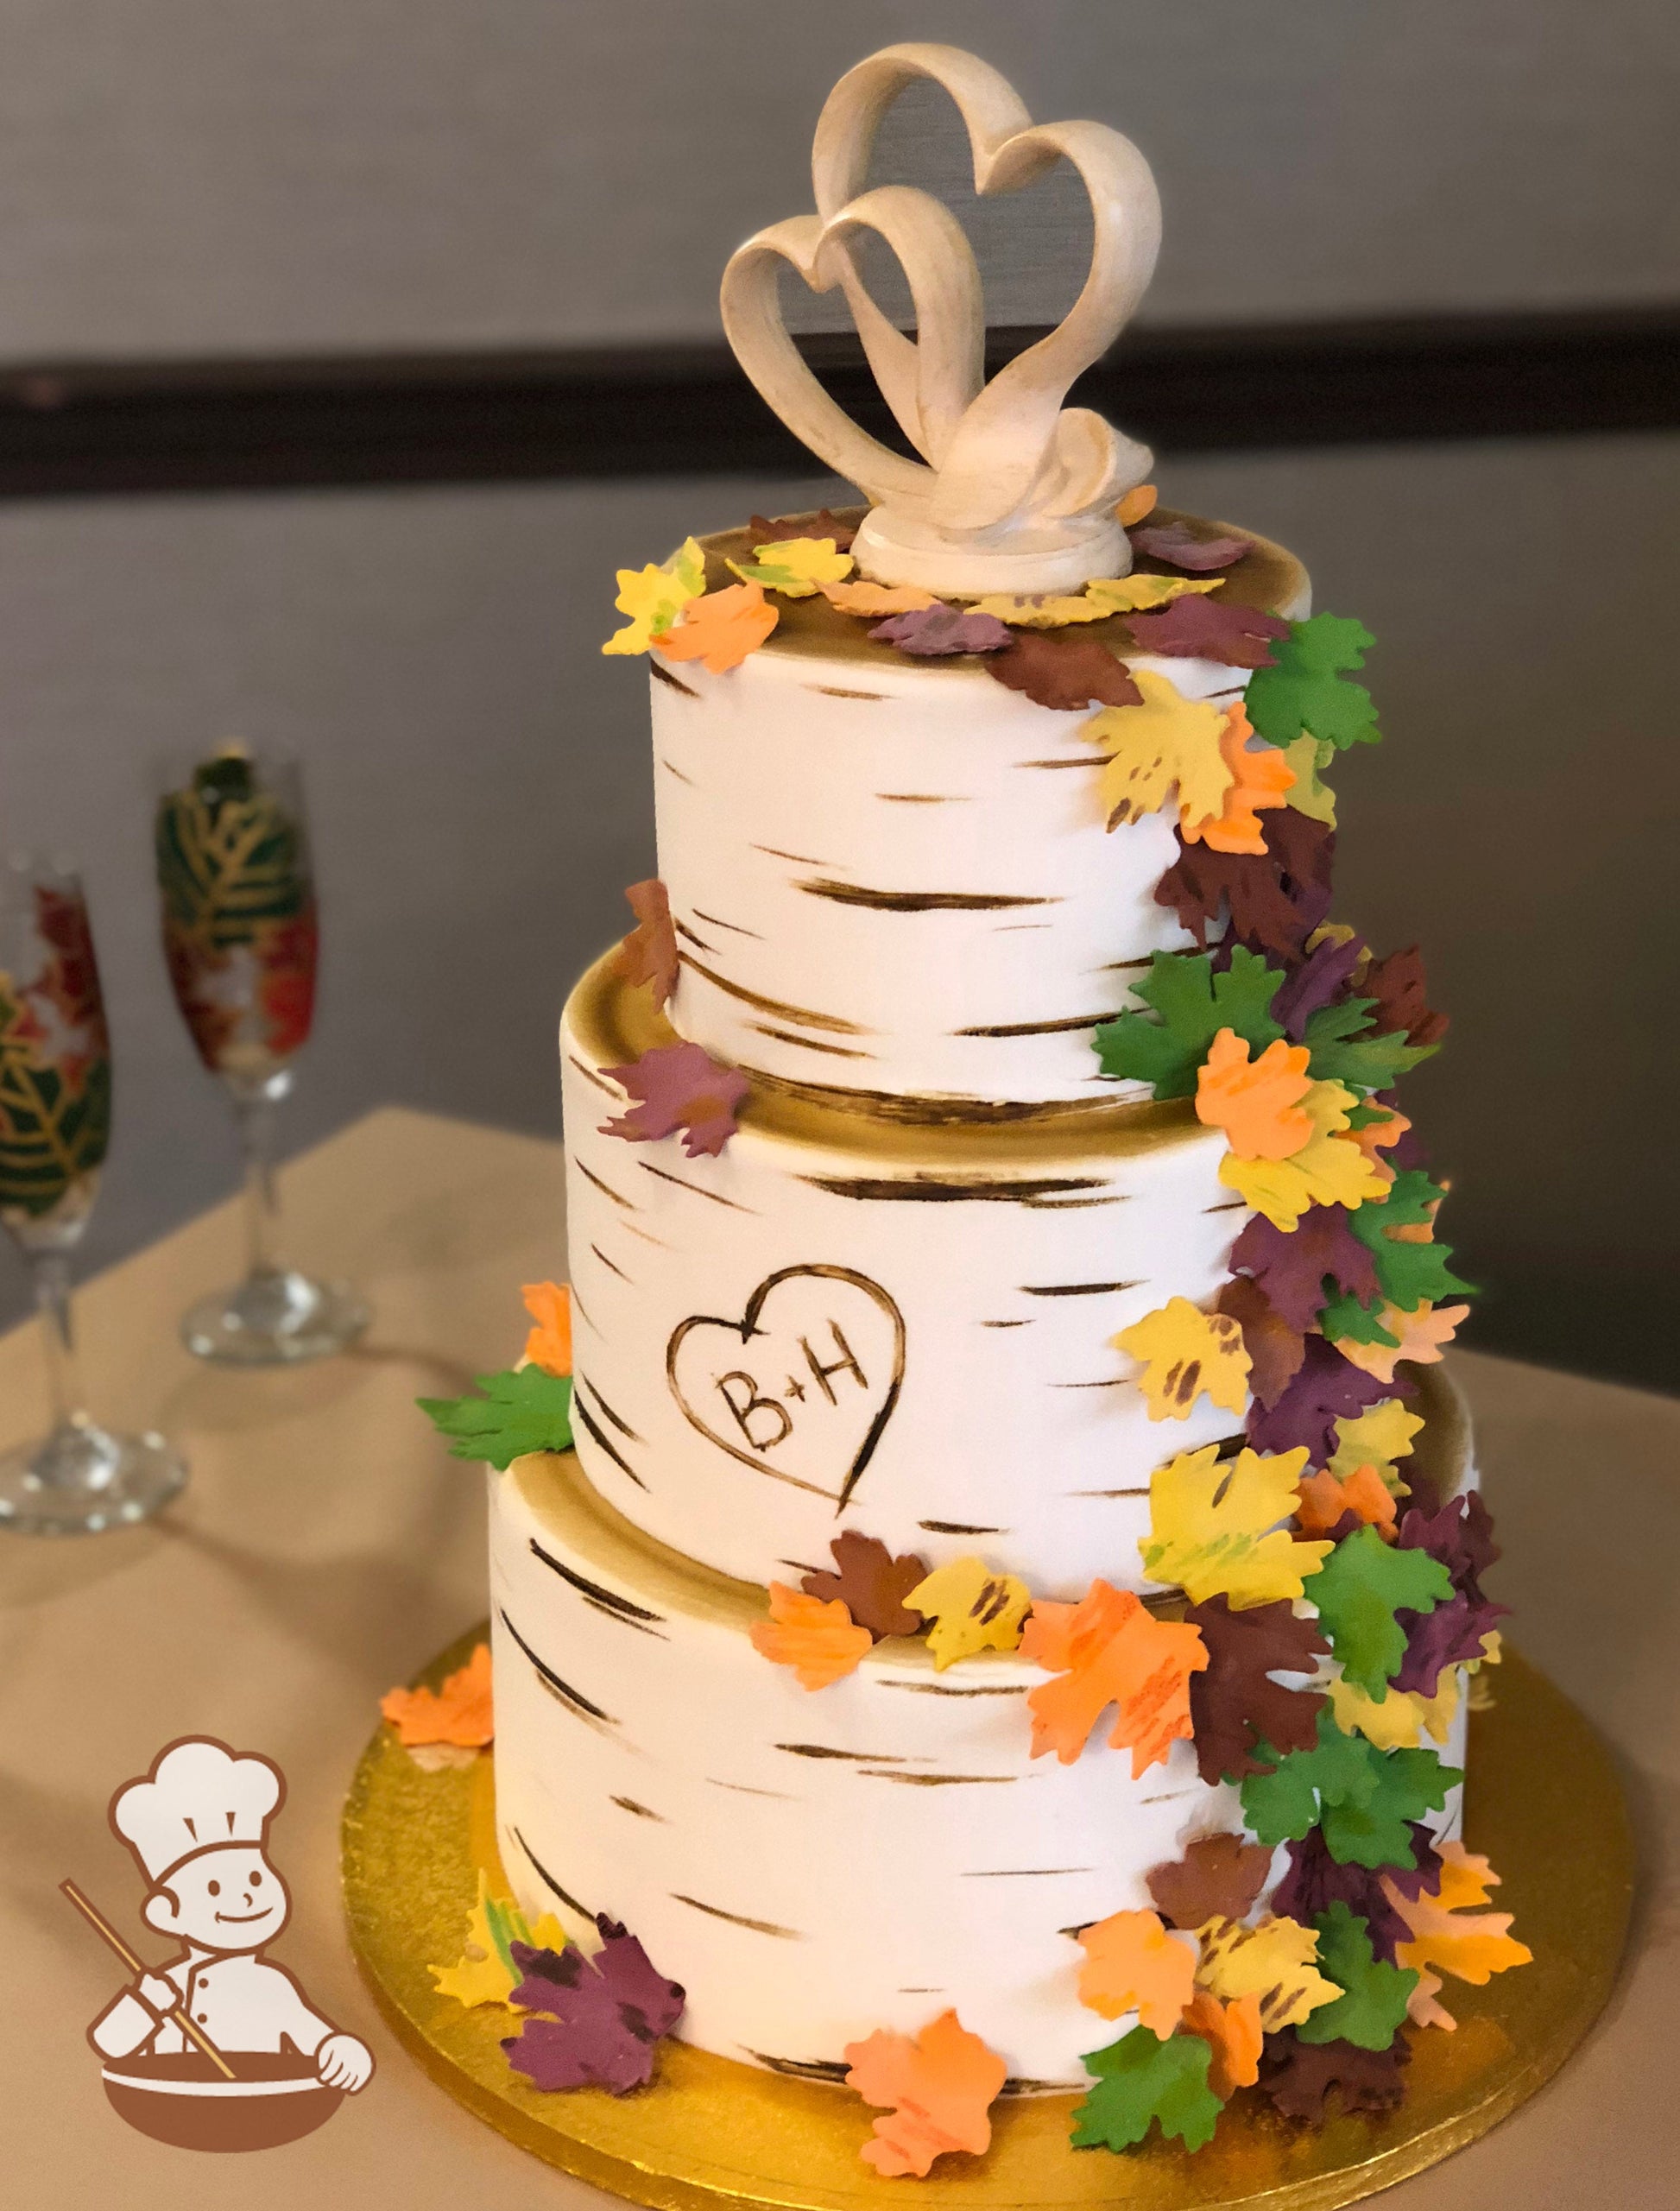 3-tier cake with smooth white icing and decorated with a painted wood grain look and a heart with the initials B + H.